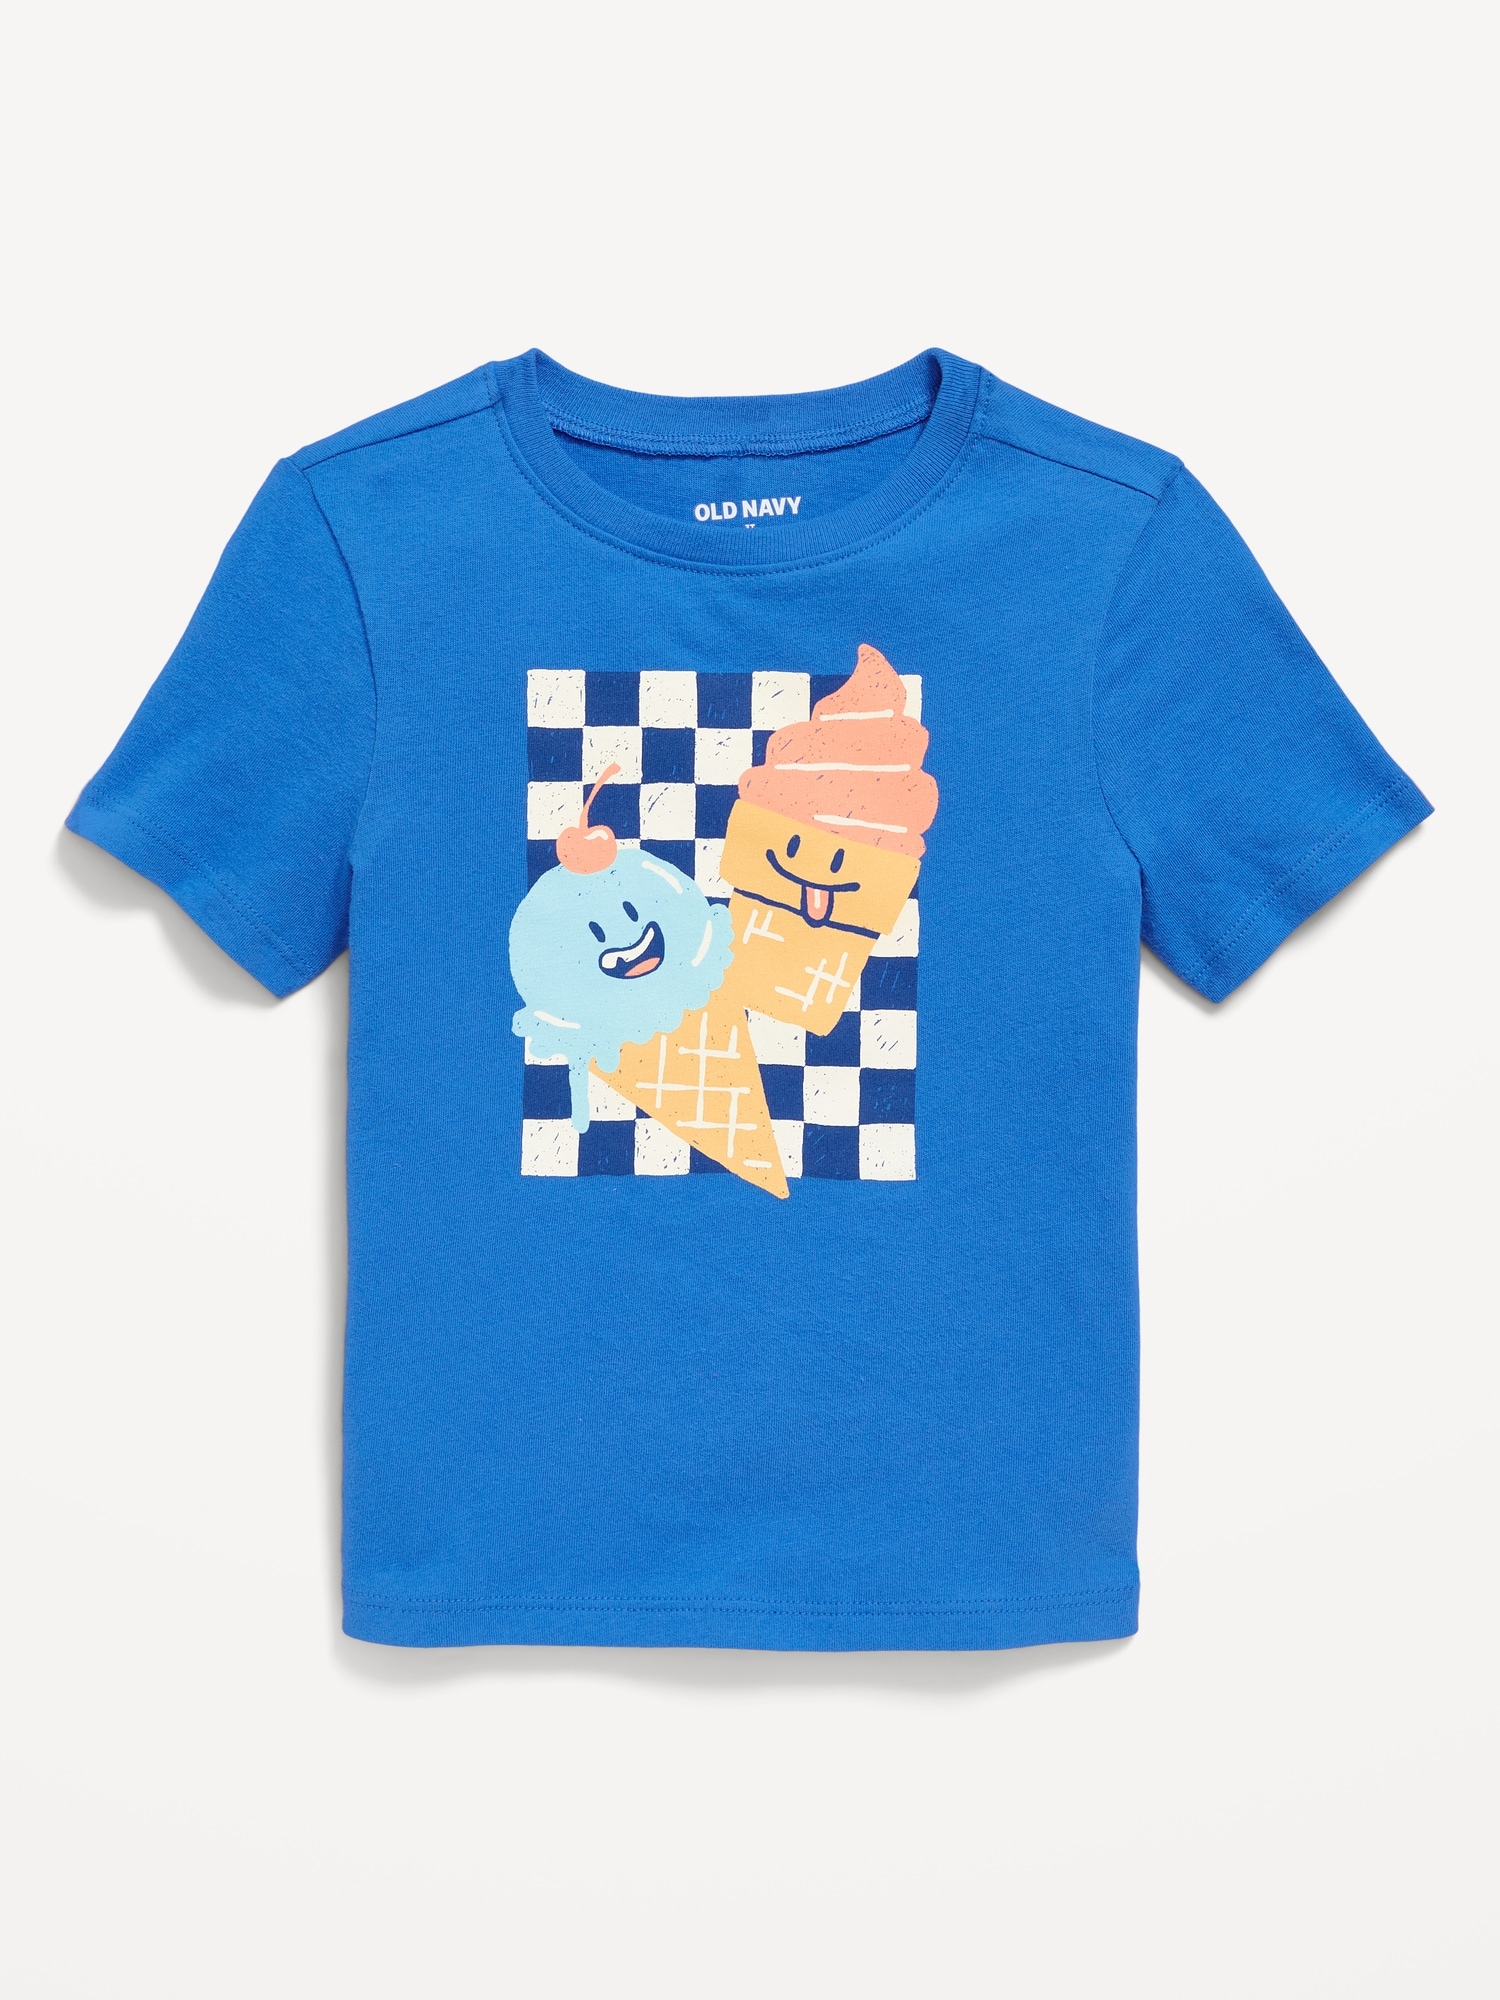 Short-Sleeve Graphic T-Shirt for Toddler Boys